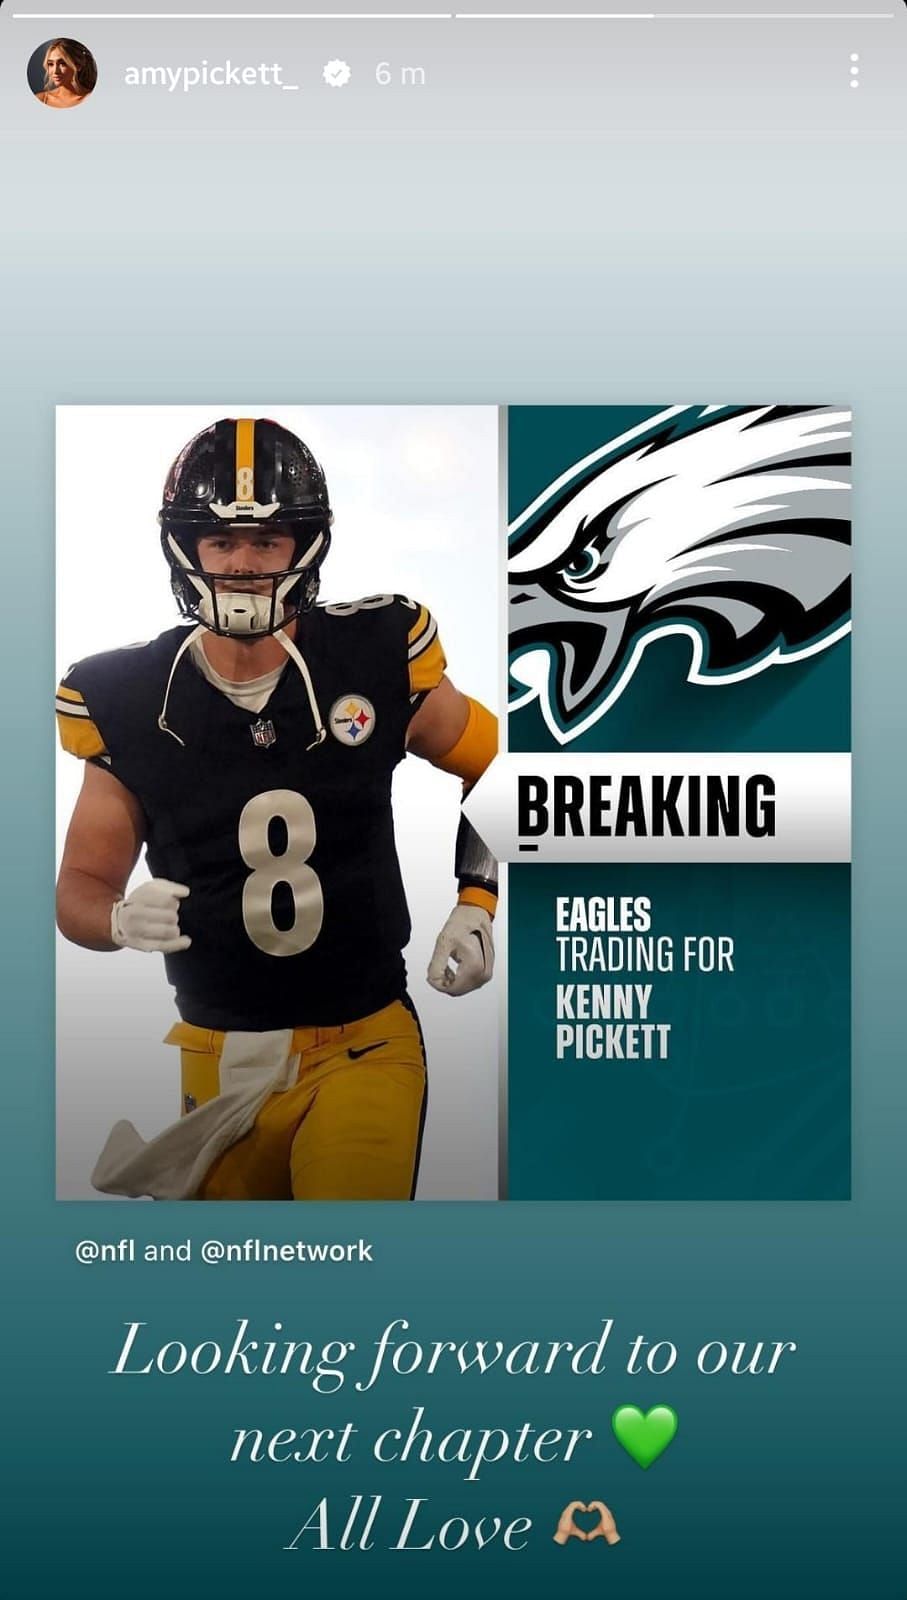 Amy Pickett shared her thoughts on the quarterback&#039;s trade to the Eagles.